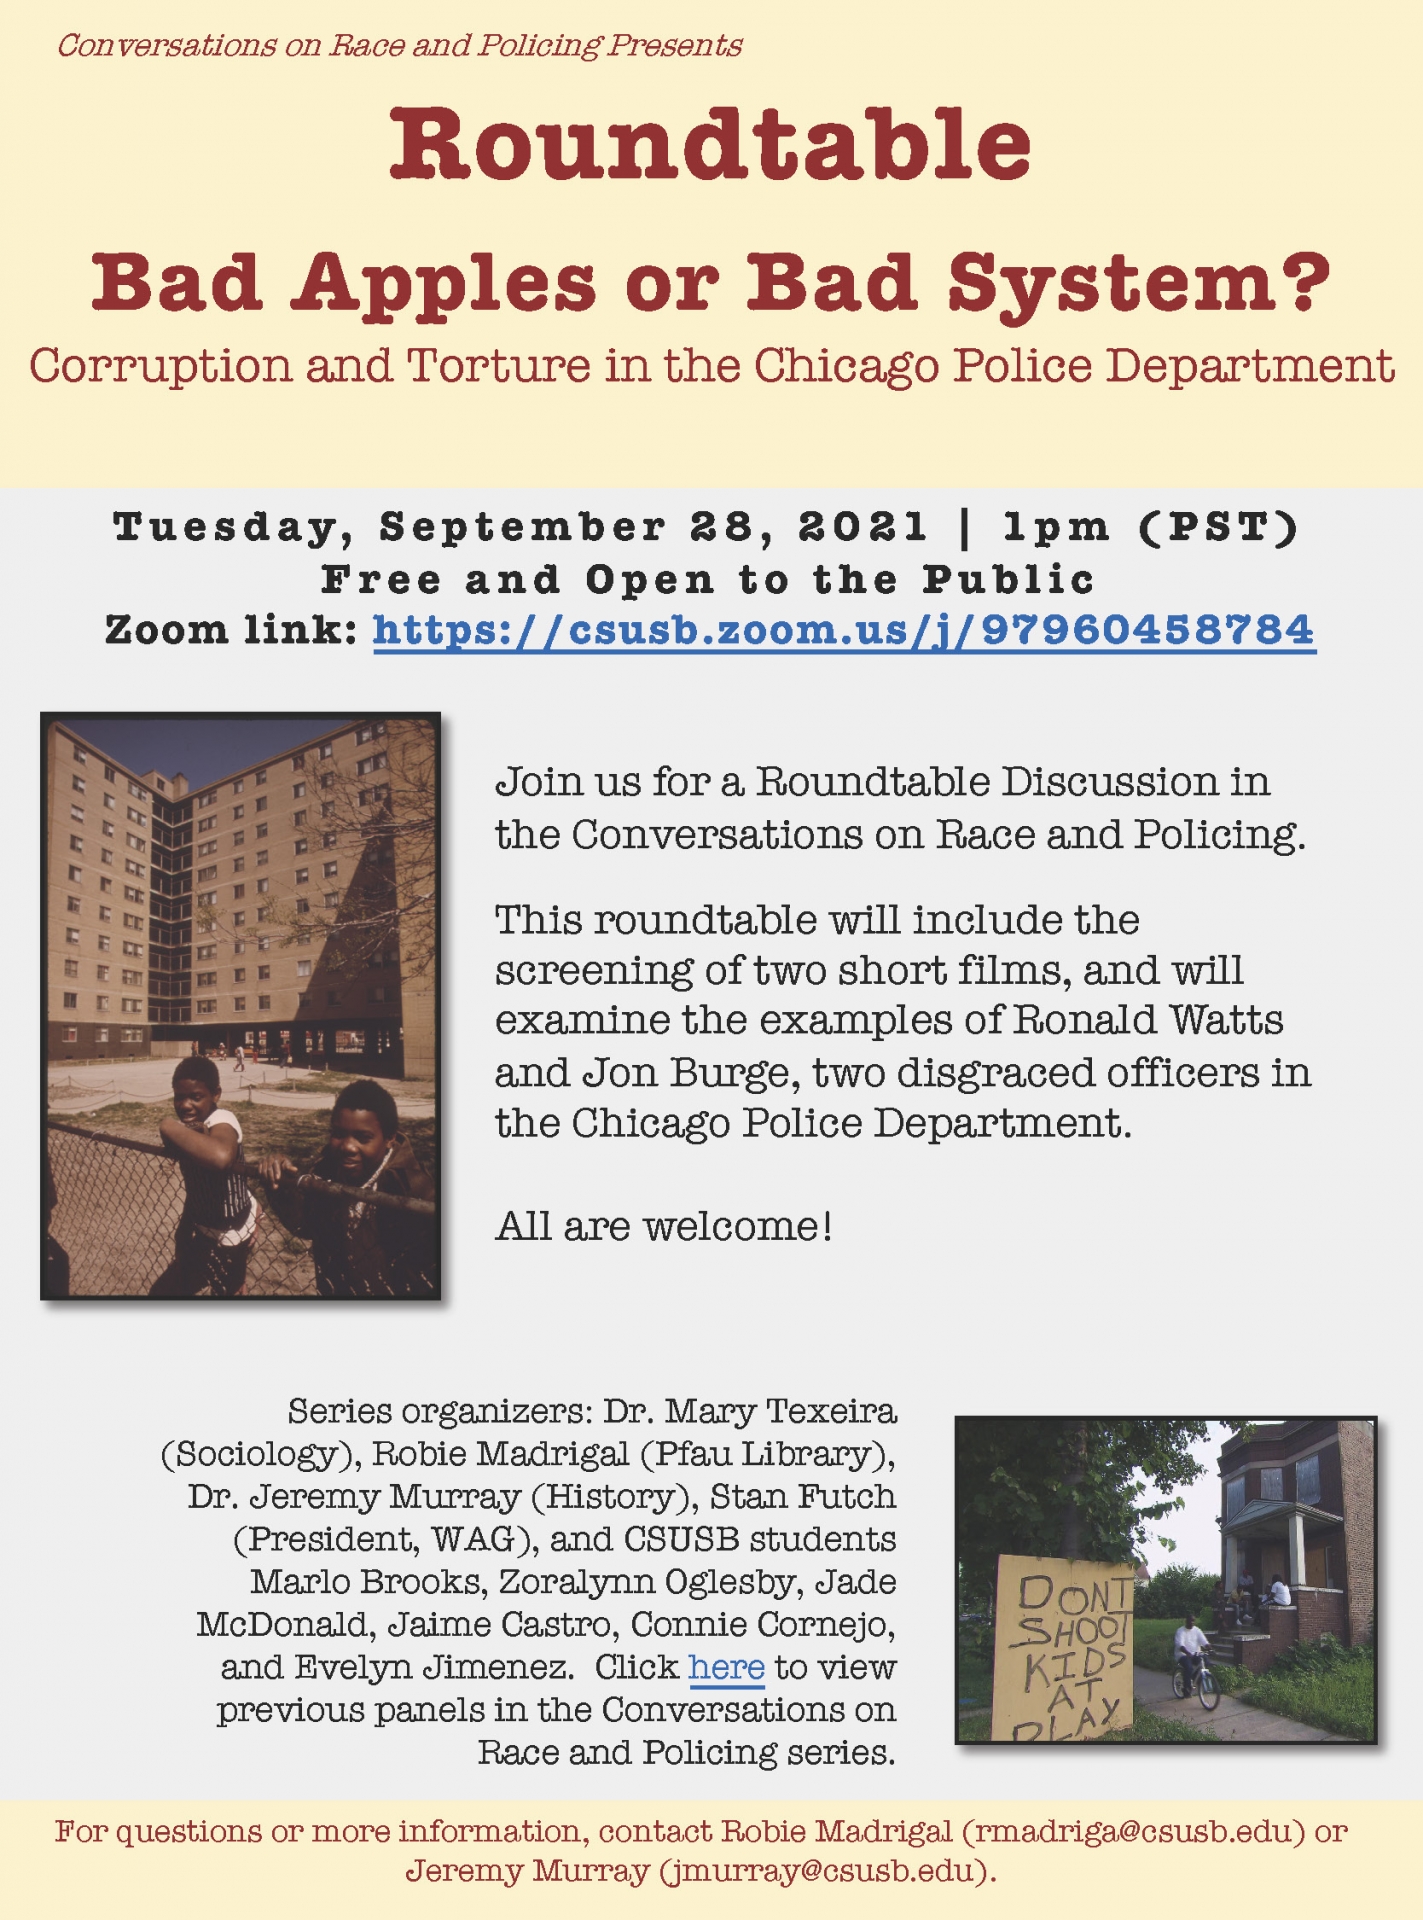 Flier: Next Conversations on Race and Policing will focus on ‘Bad Apples or Bad System? Corruption and Torture in the Chicago Police Department’